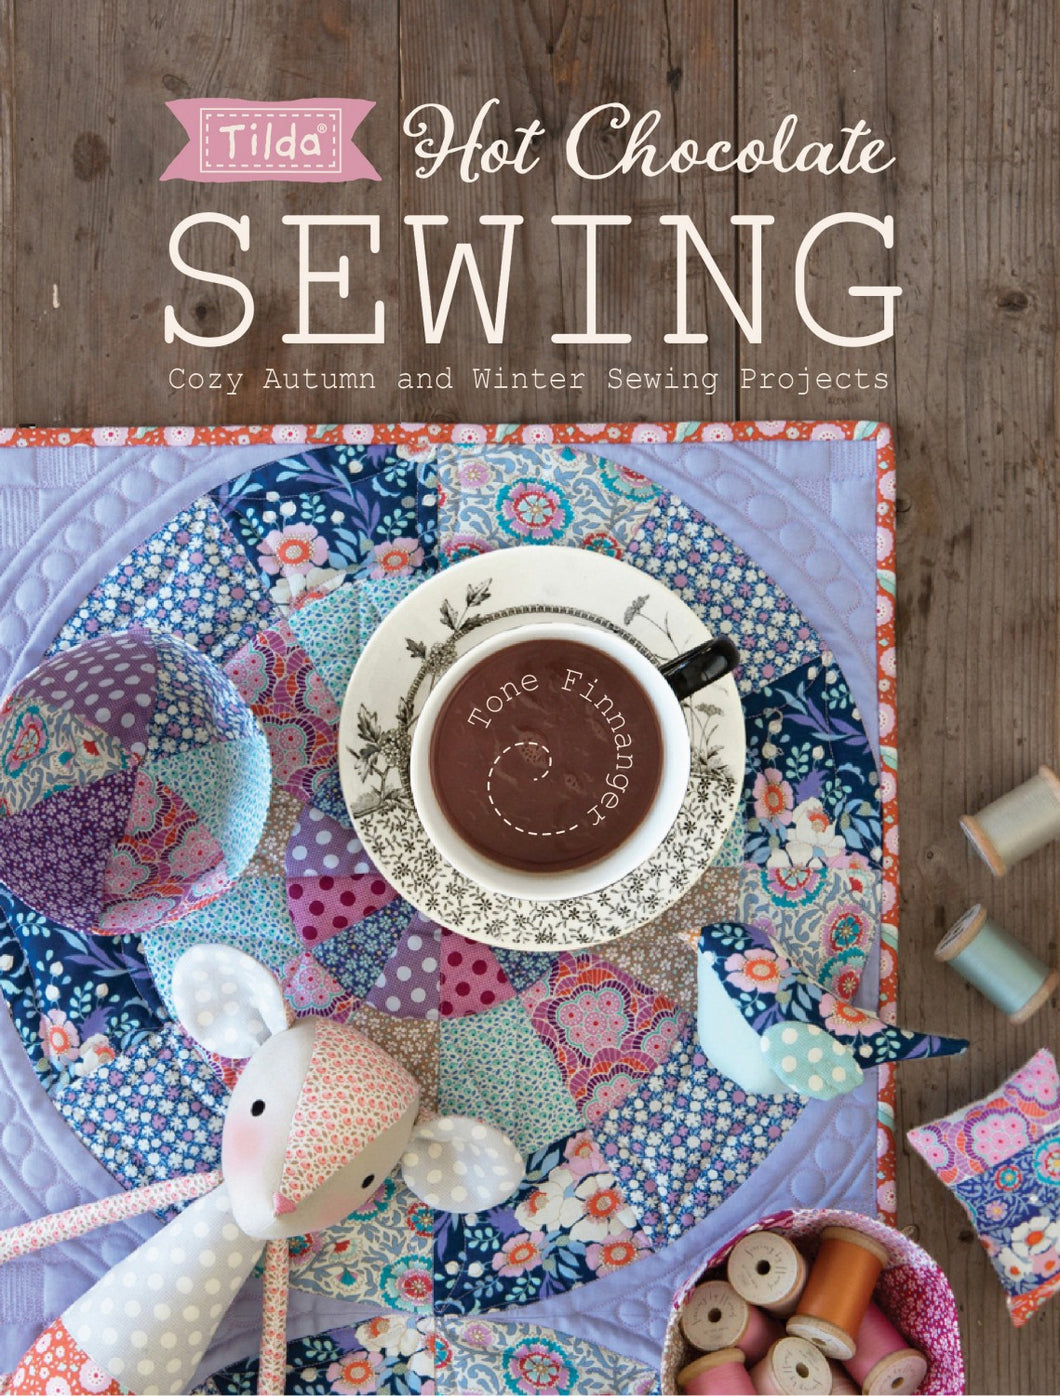 Hot Chocolate Sewing book